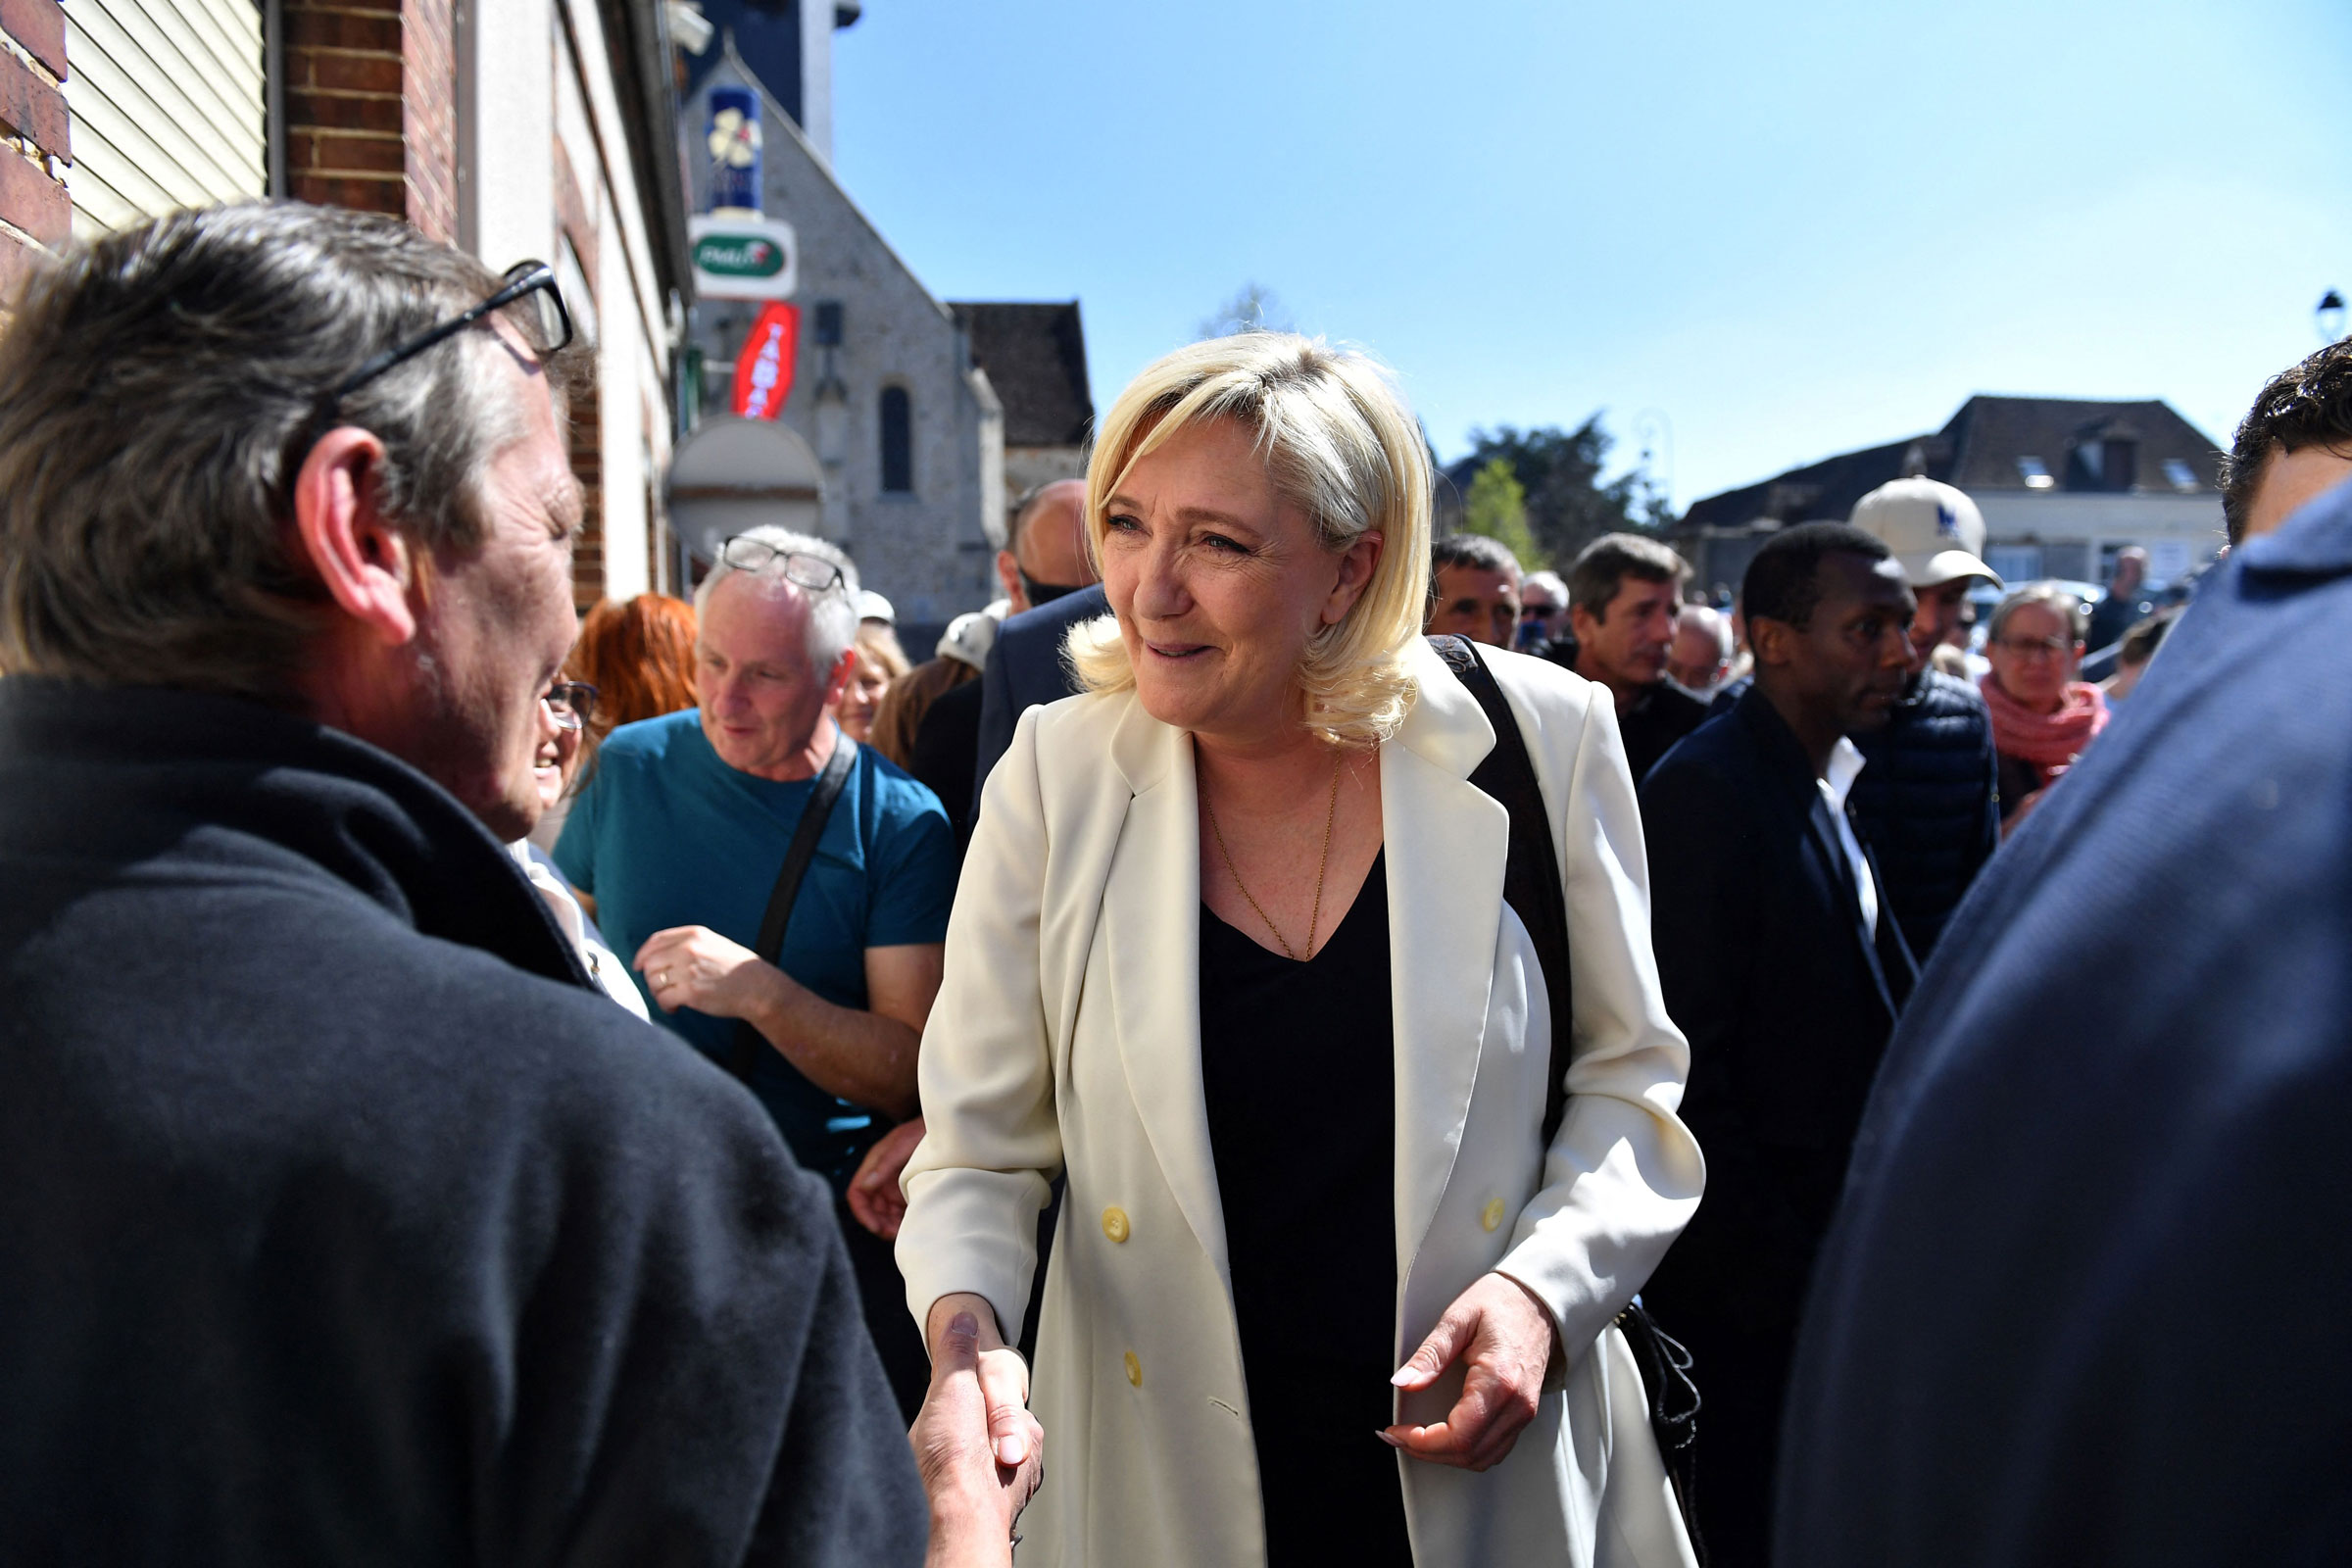 Marine Le Pen shakes hands with a member of the public during a campaign visit